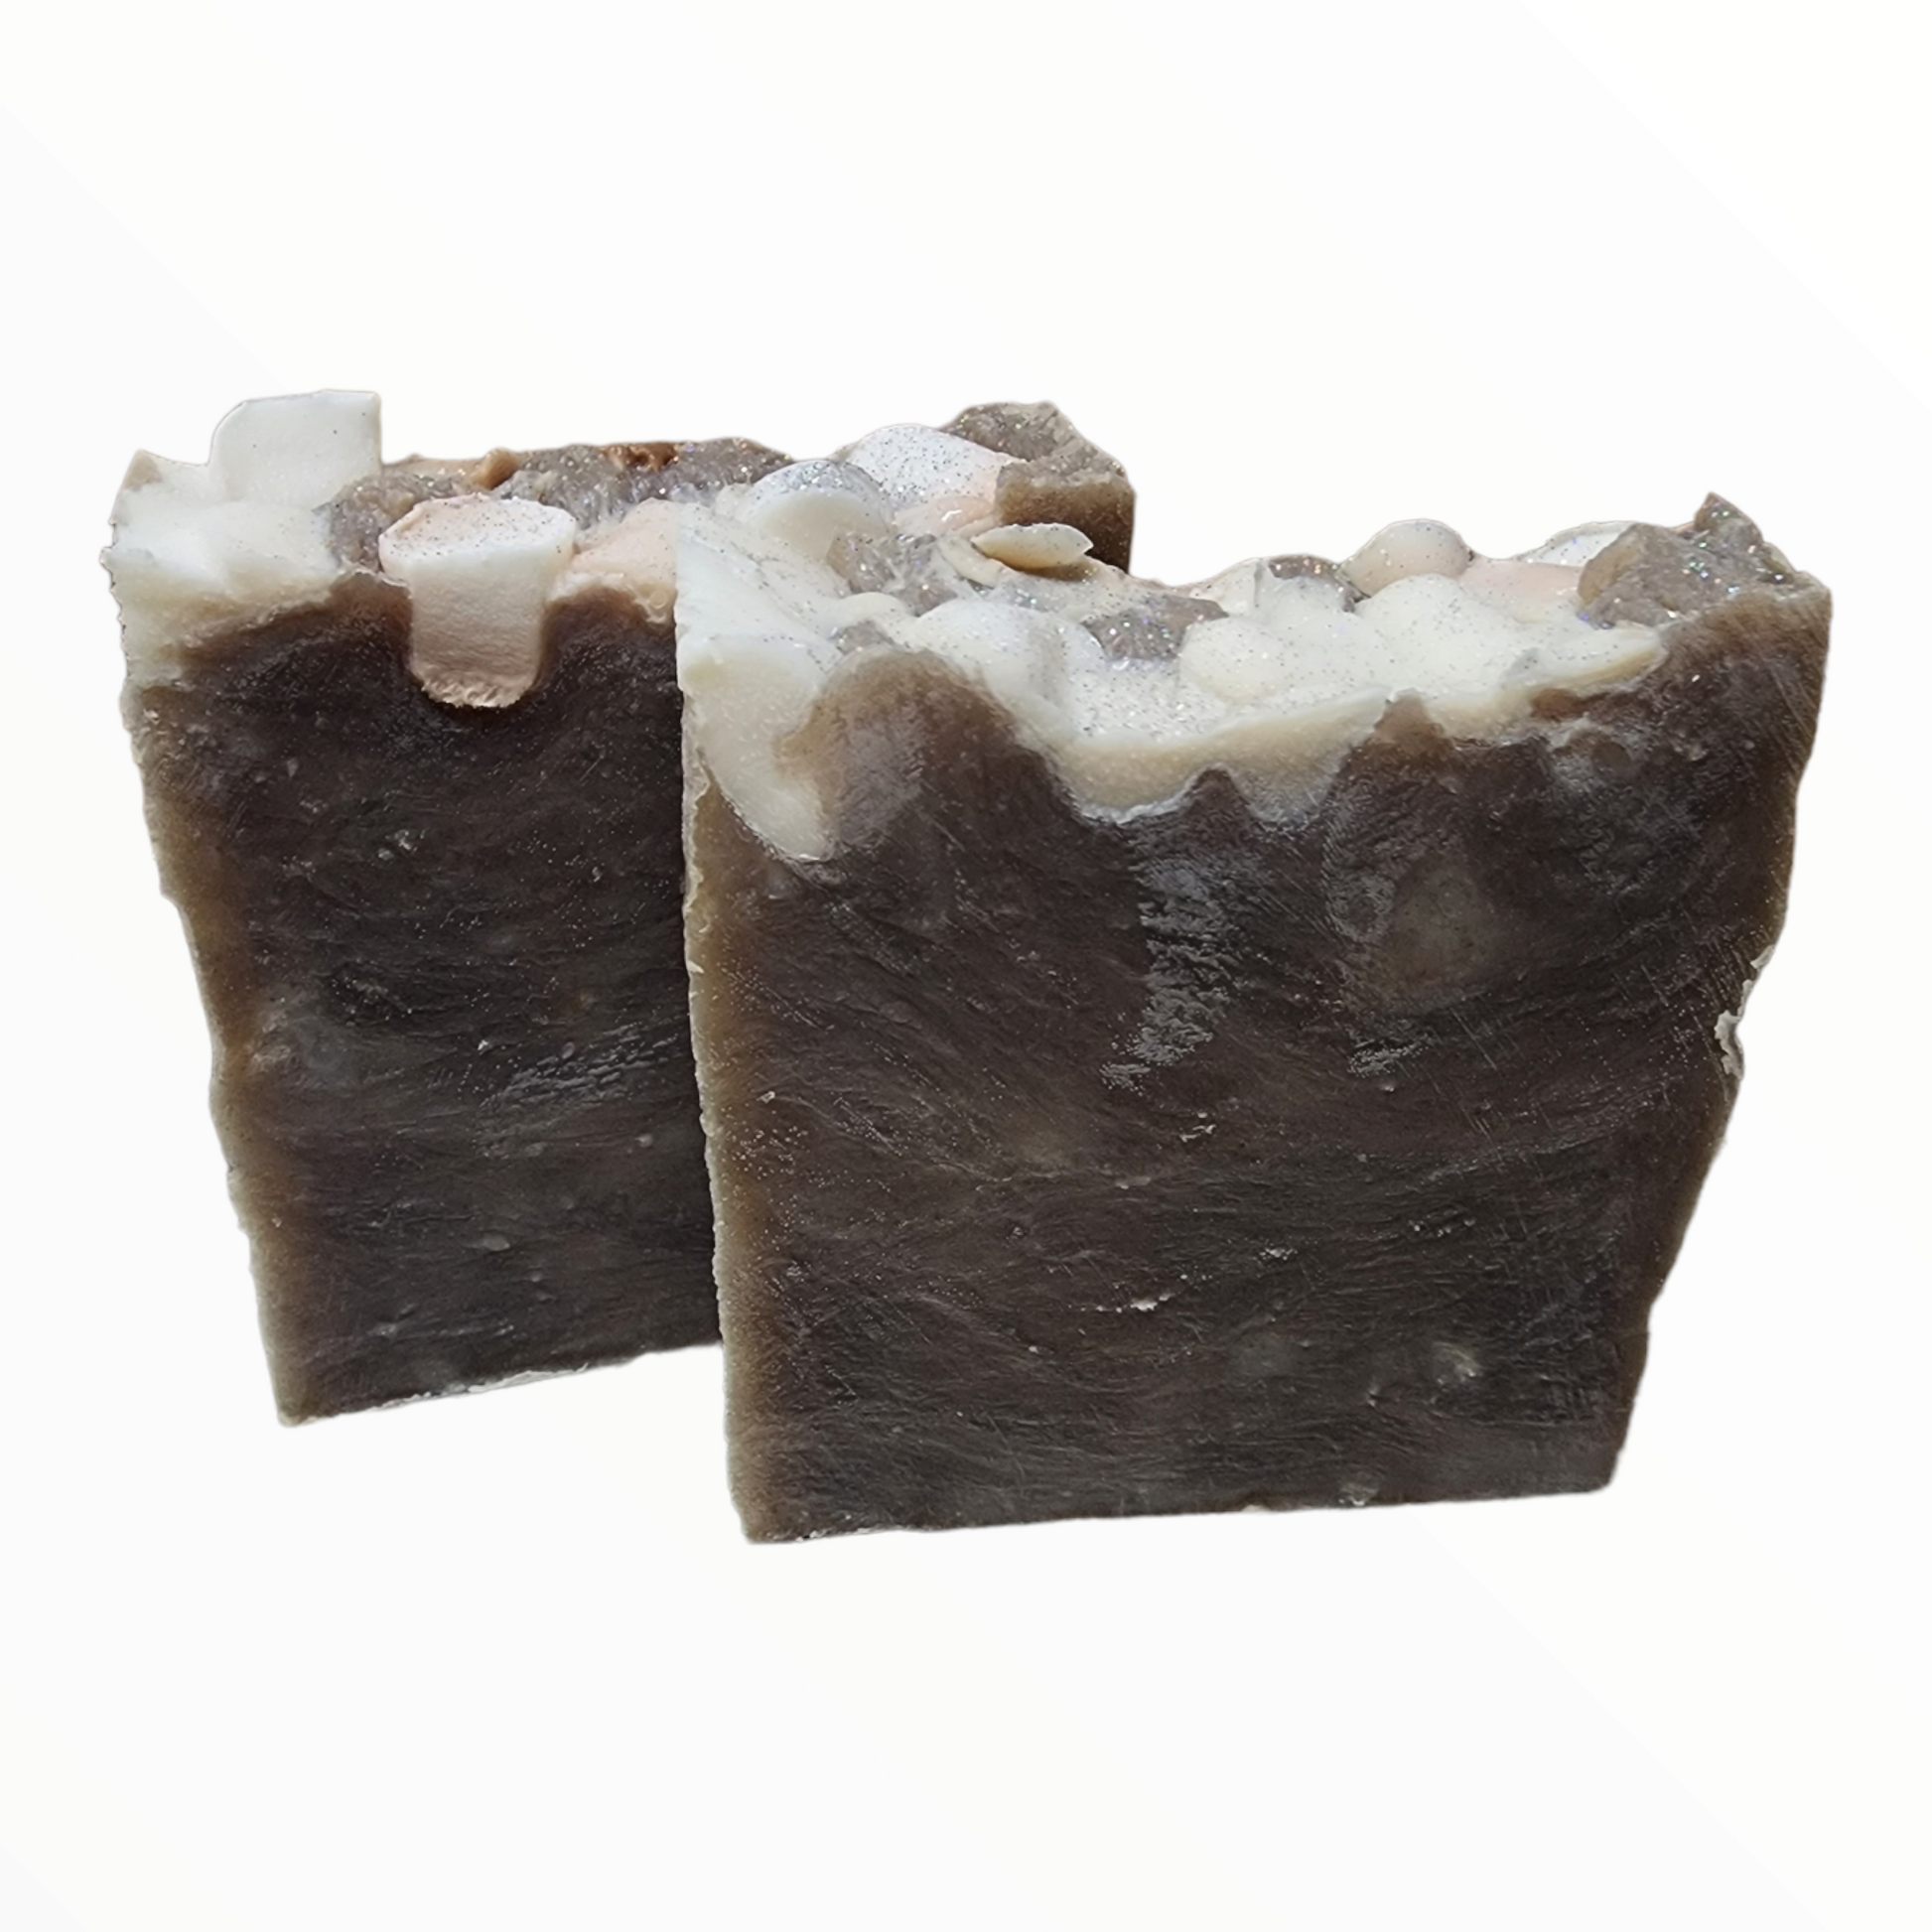 Hot Cocoa Christmas Soap - Stacy's Soap Suds